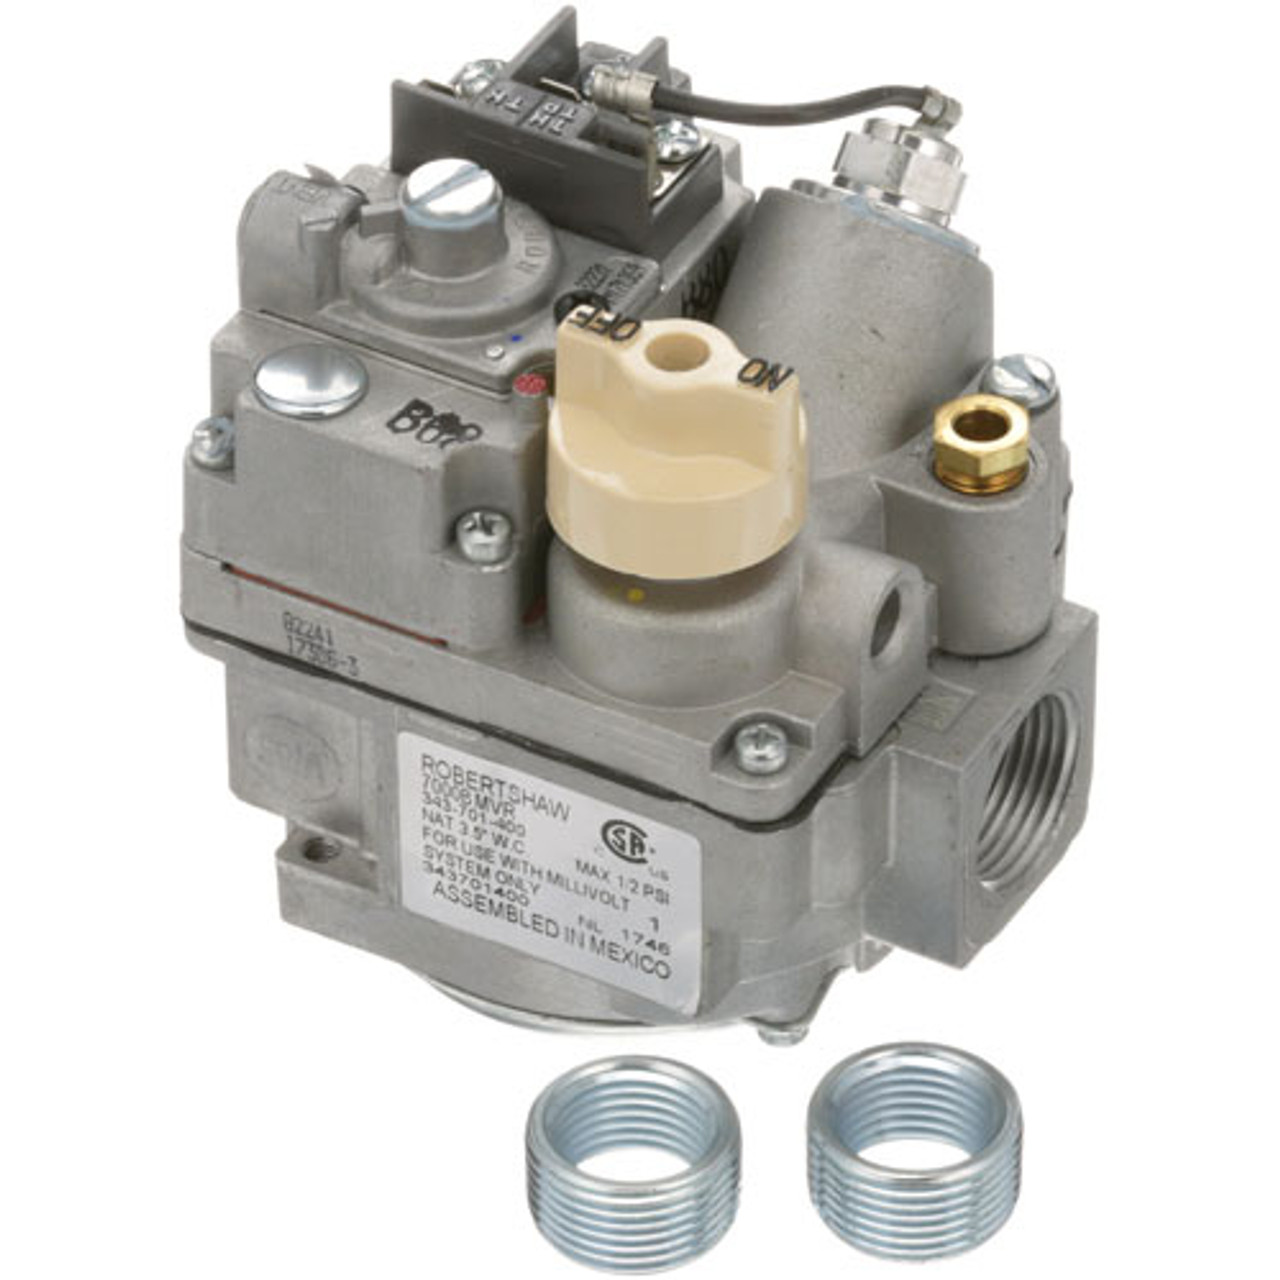 Gas Control - Replacement Part For Dean 8070306